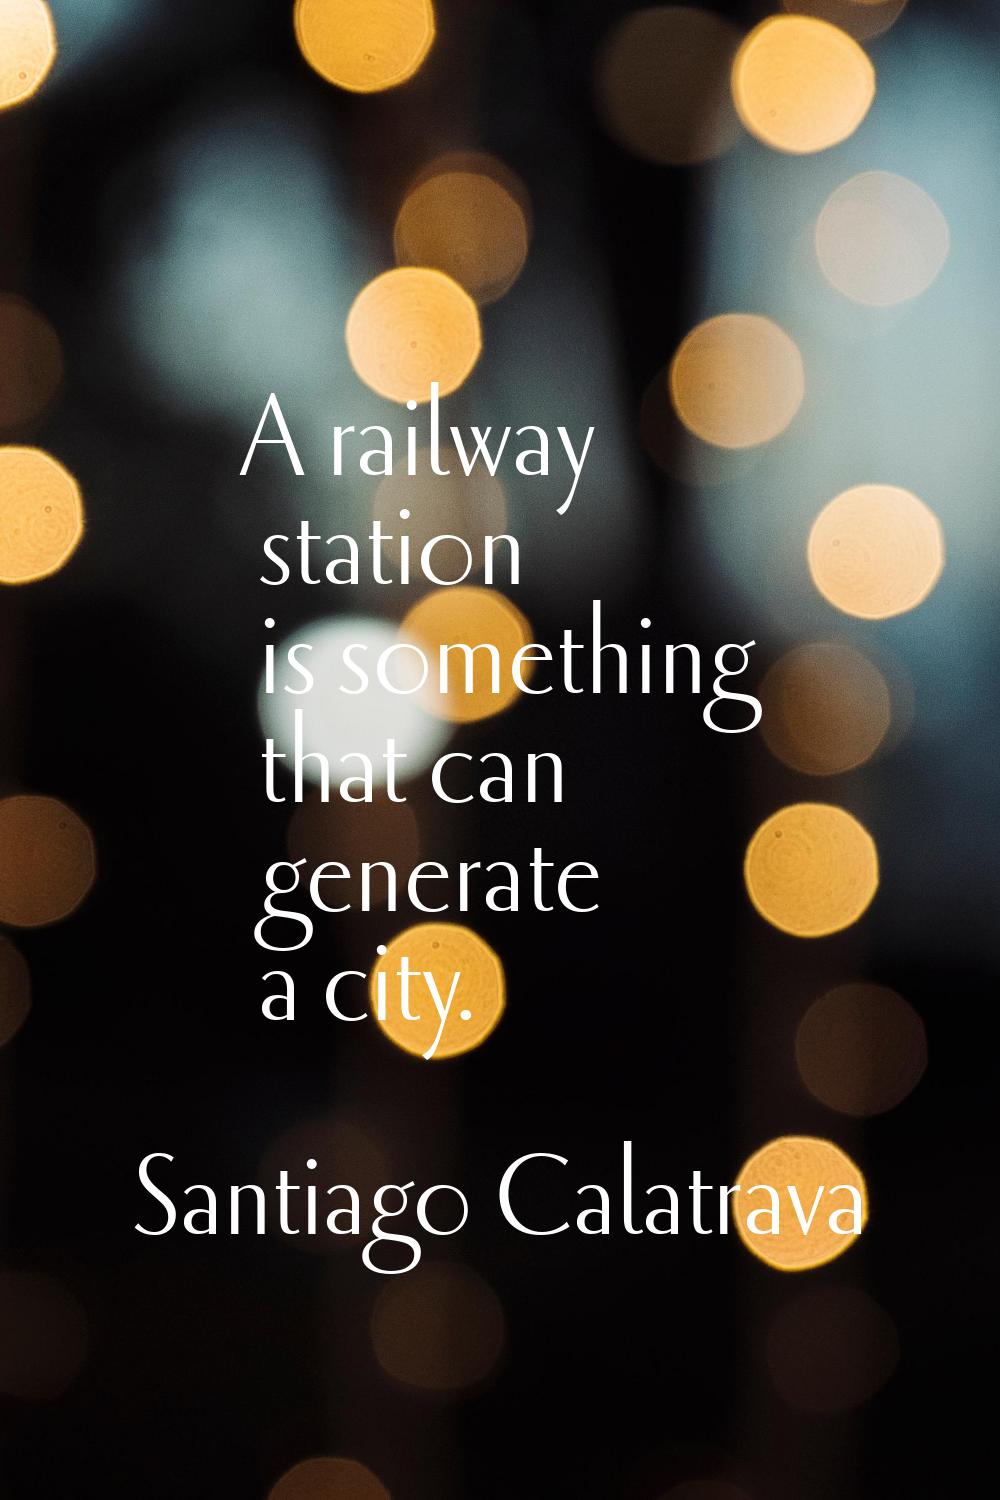 A railway station is something that can generate a city.